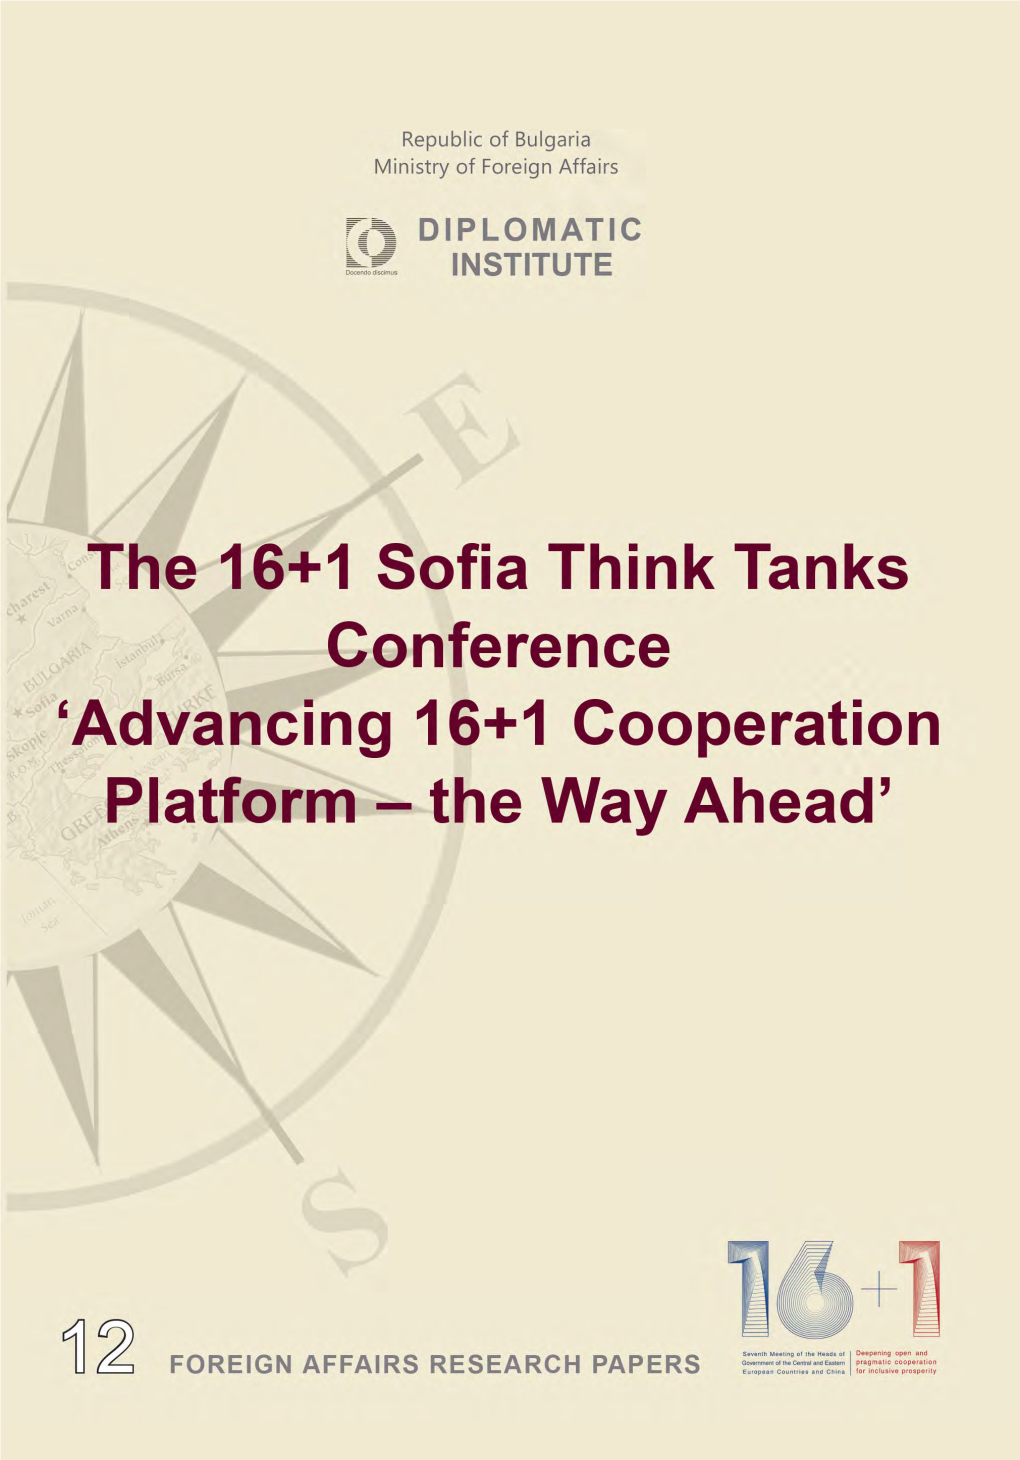 The 16+1 Sofia Think Tanks Conference 'Advancing 16+1 Cooperation Platform – the Way Ahead'